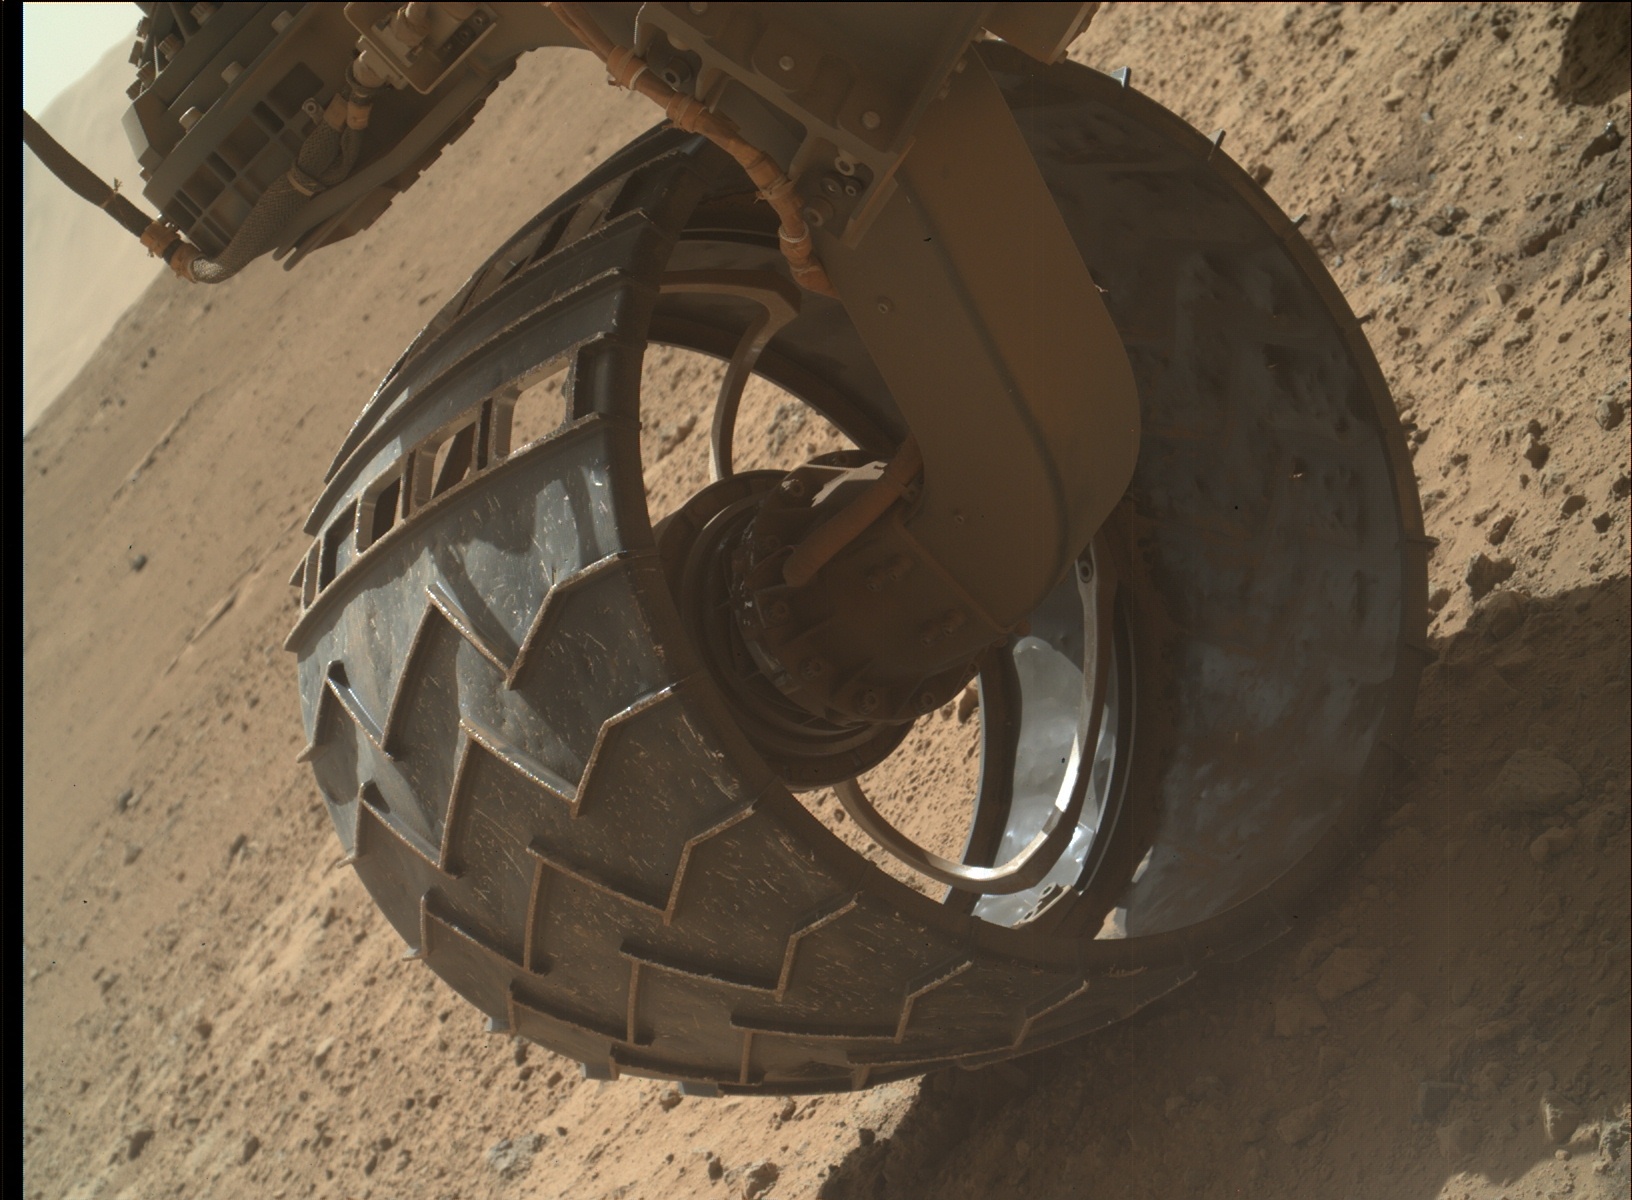 Nasa's Mars rover Curiosity acquired this image using its Mars Hand Lens Imager (MAHLI) on Sol 653